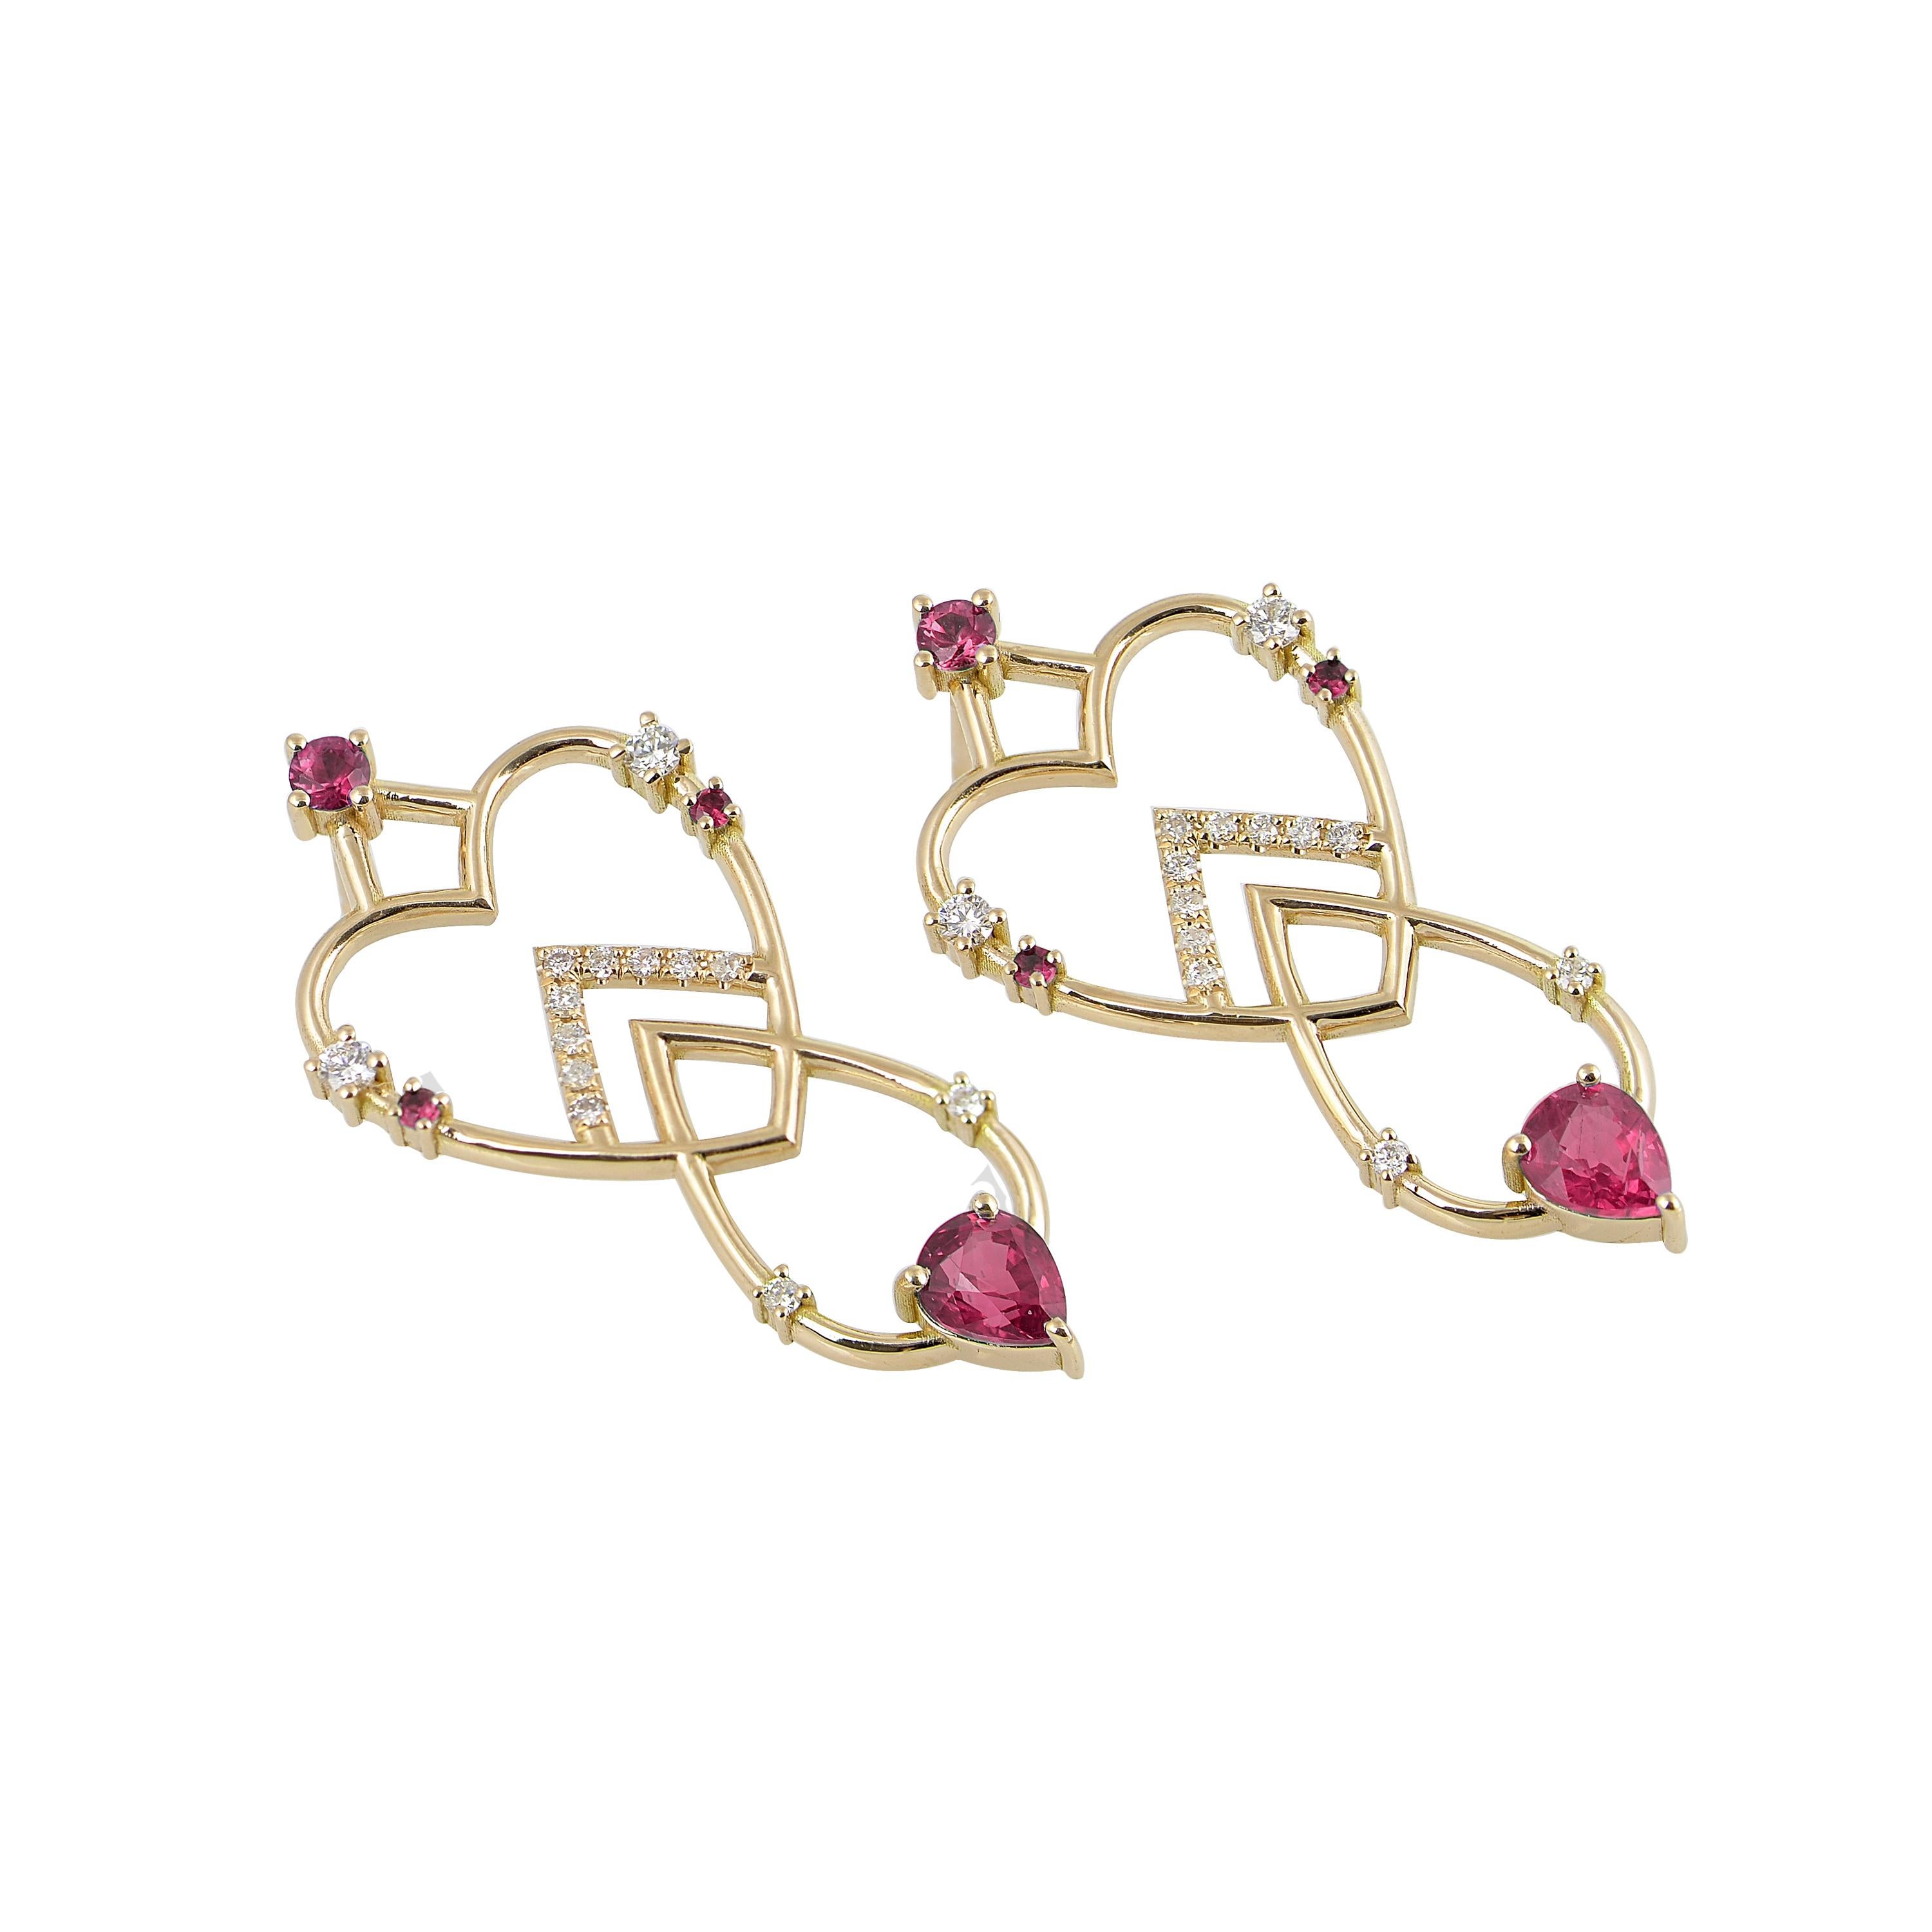 Designer: Alexia Gryllaki
Dimensions: L34x16mm
Weight: approximately 5.9g (pair)
Barcode: ING005ER

The Interlocking Geometry earrings in 18 karat yellow gold with rubies approx. 1.21cts and round brilliant-cut diamonds approx. 0.24cts.

About the